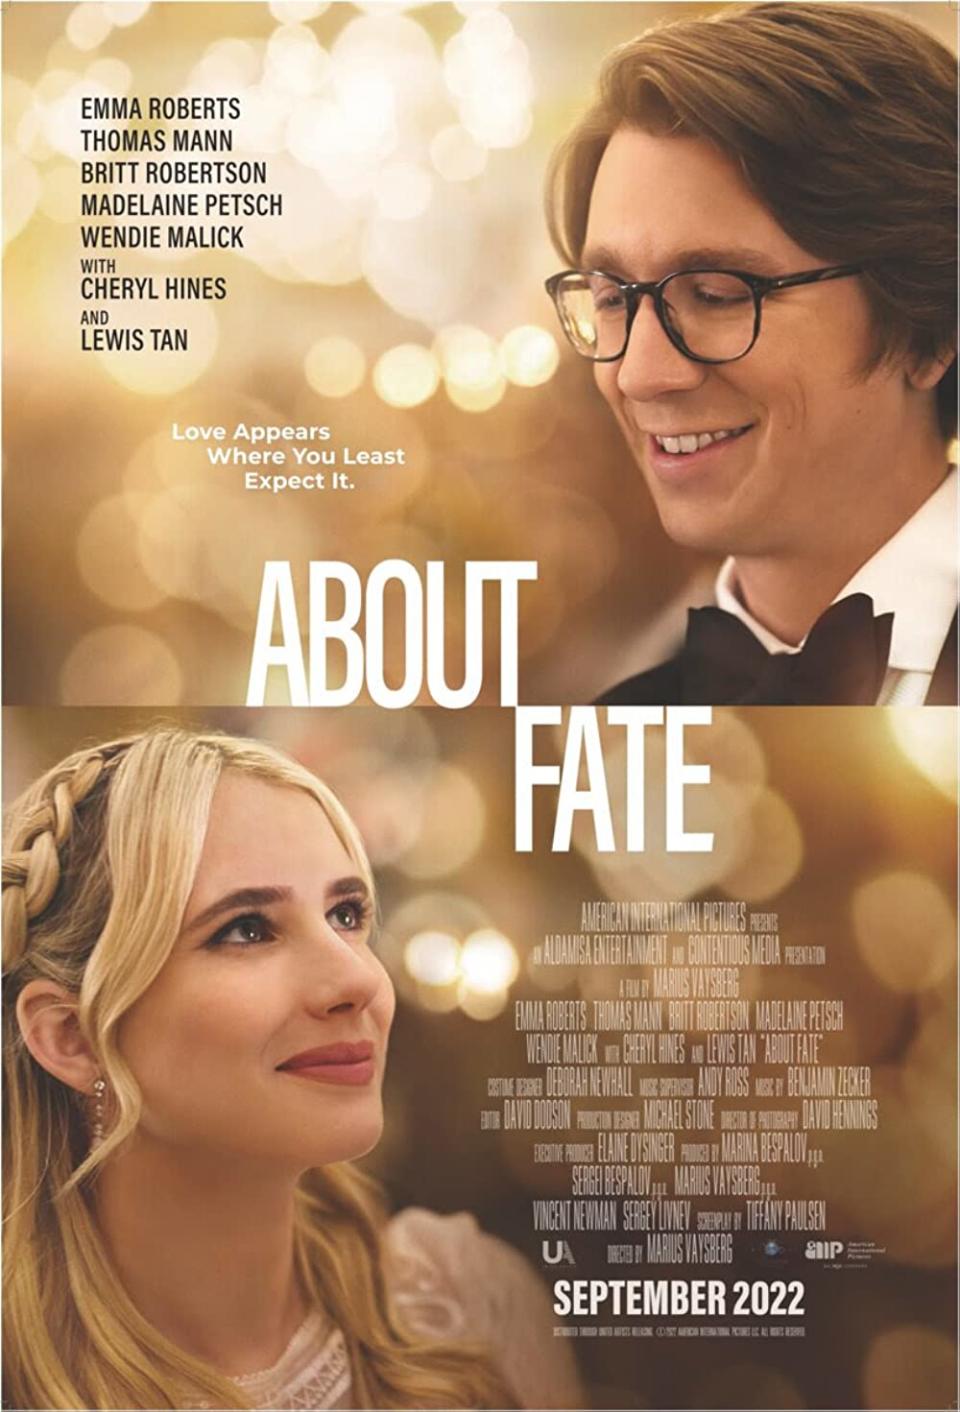 A poster for the film "About Fate."